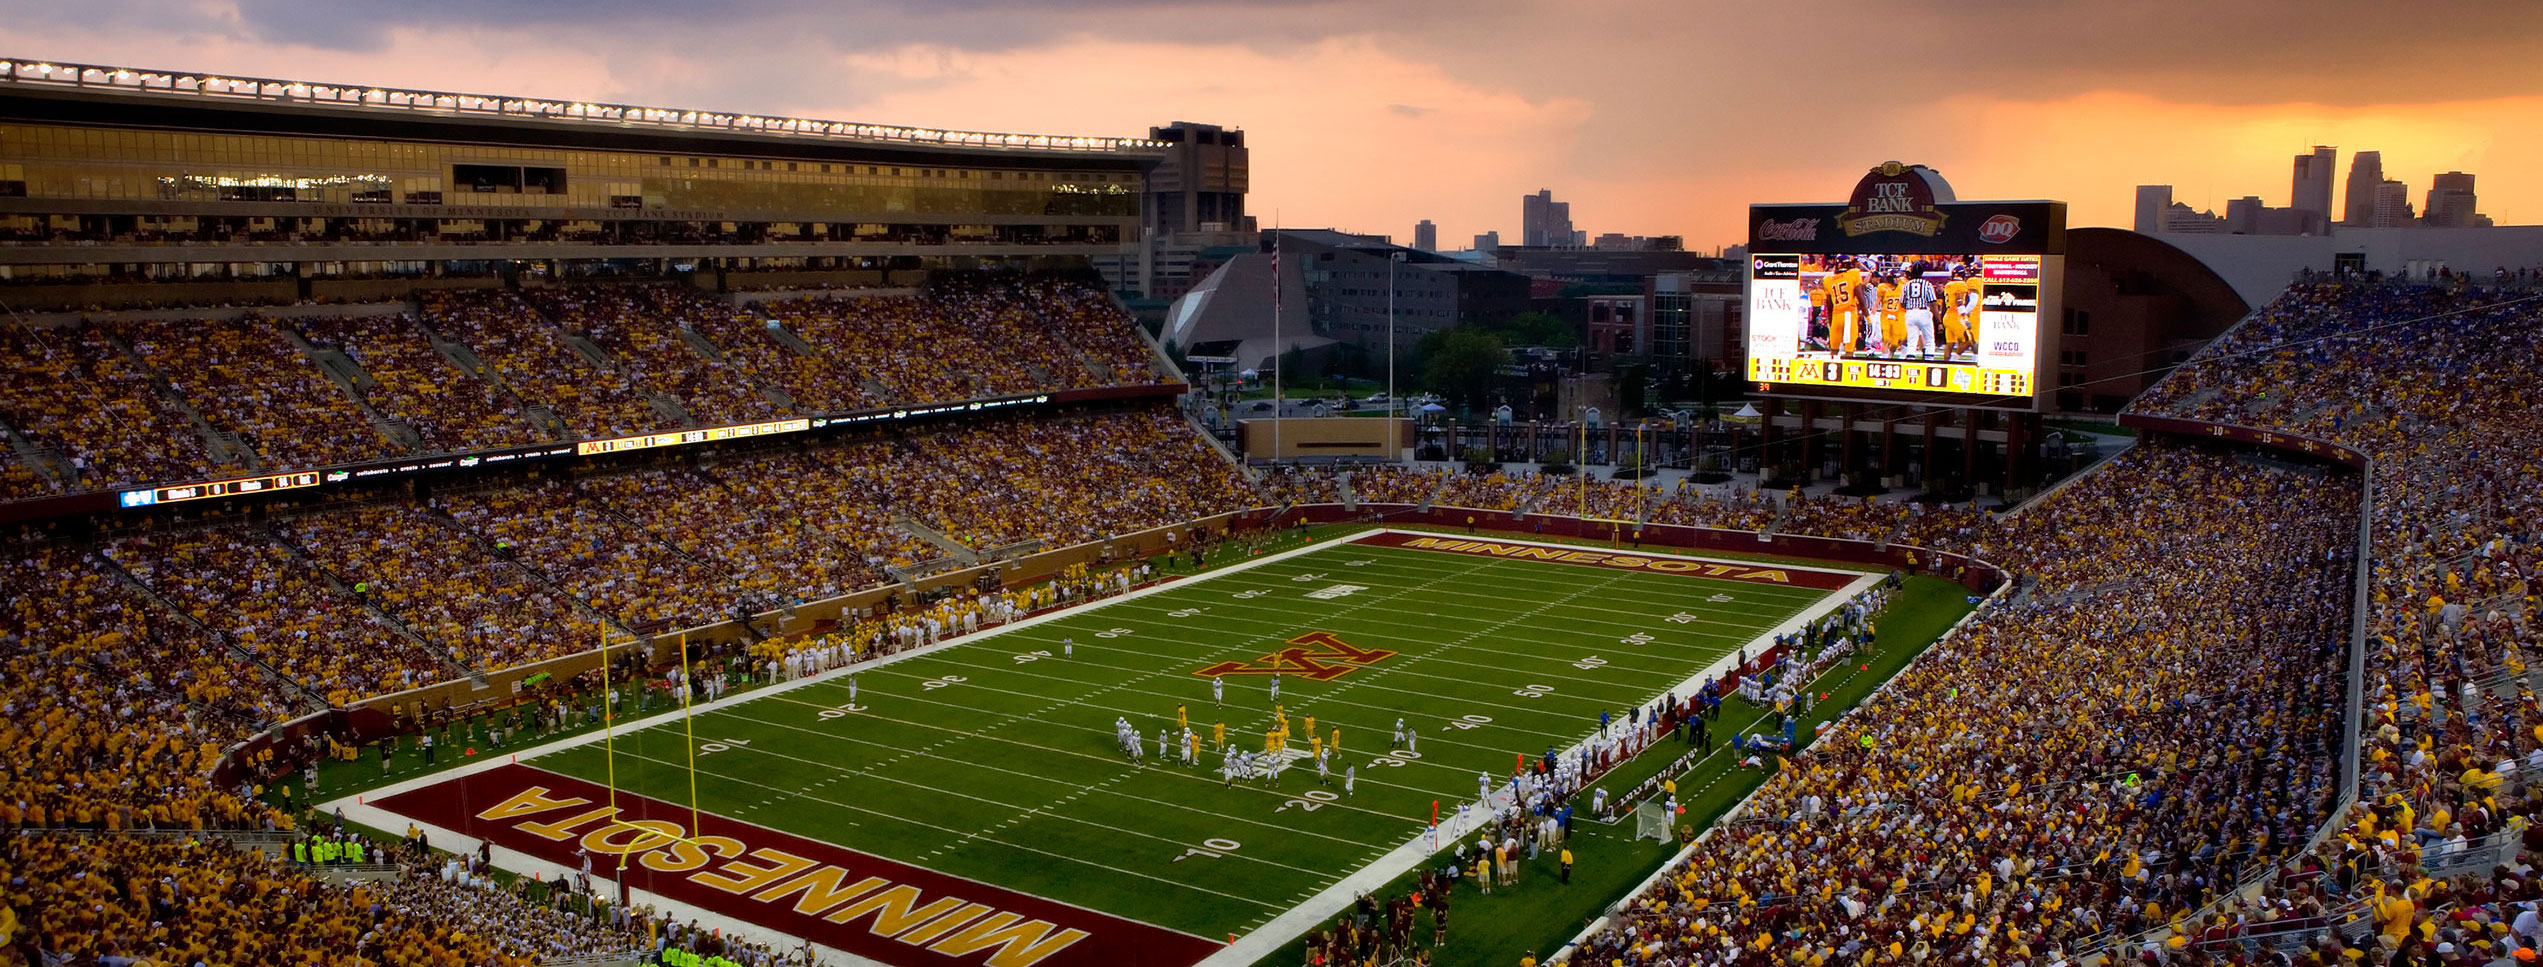 TCF Bank Stadium full with football fans